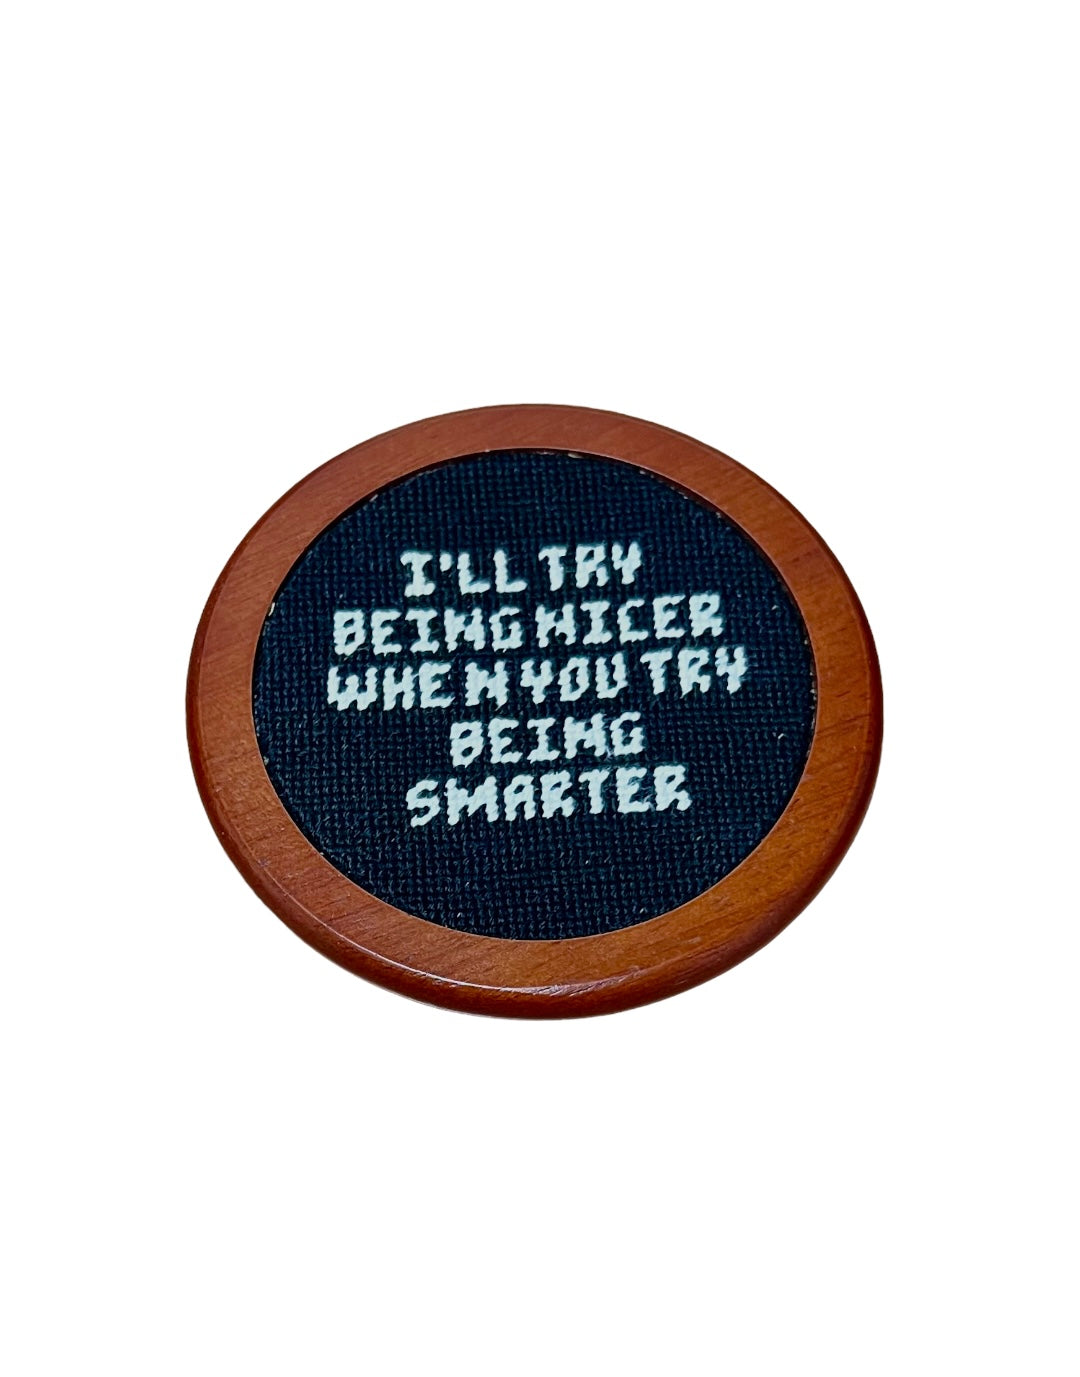 TRY BEING SMARTER COASTER